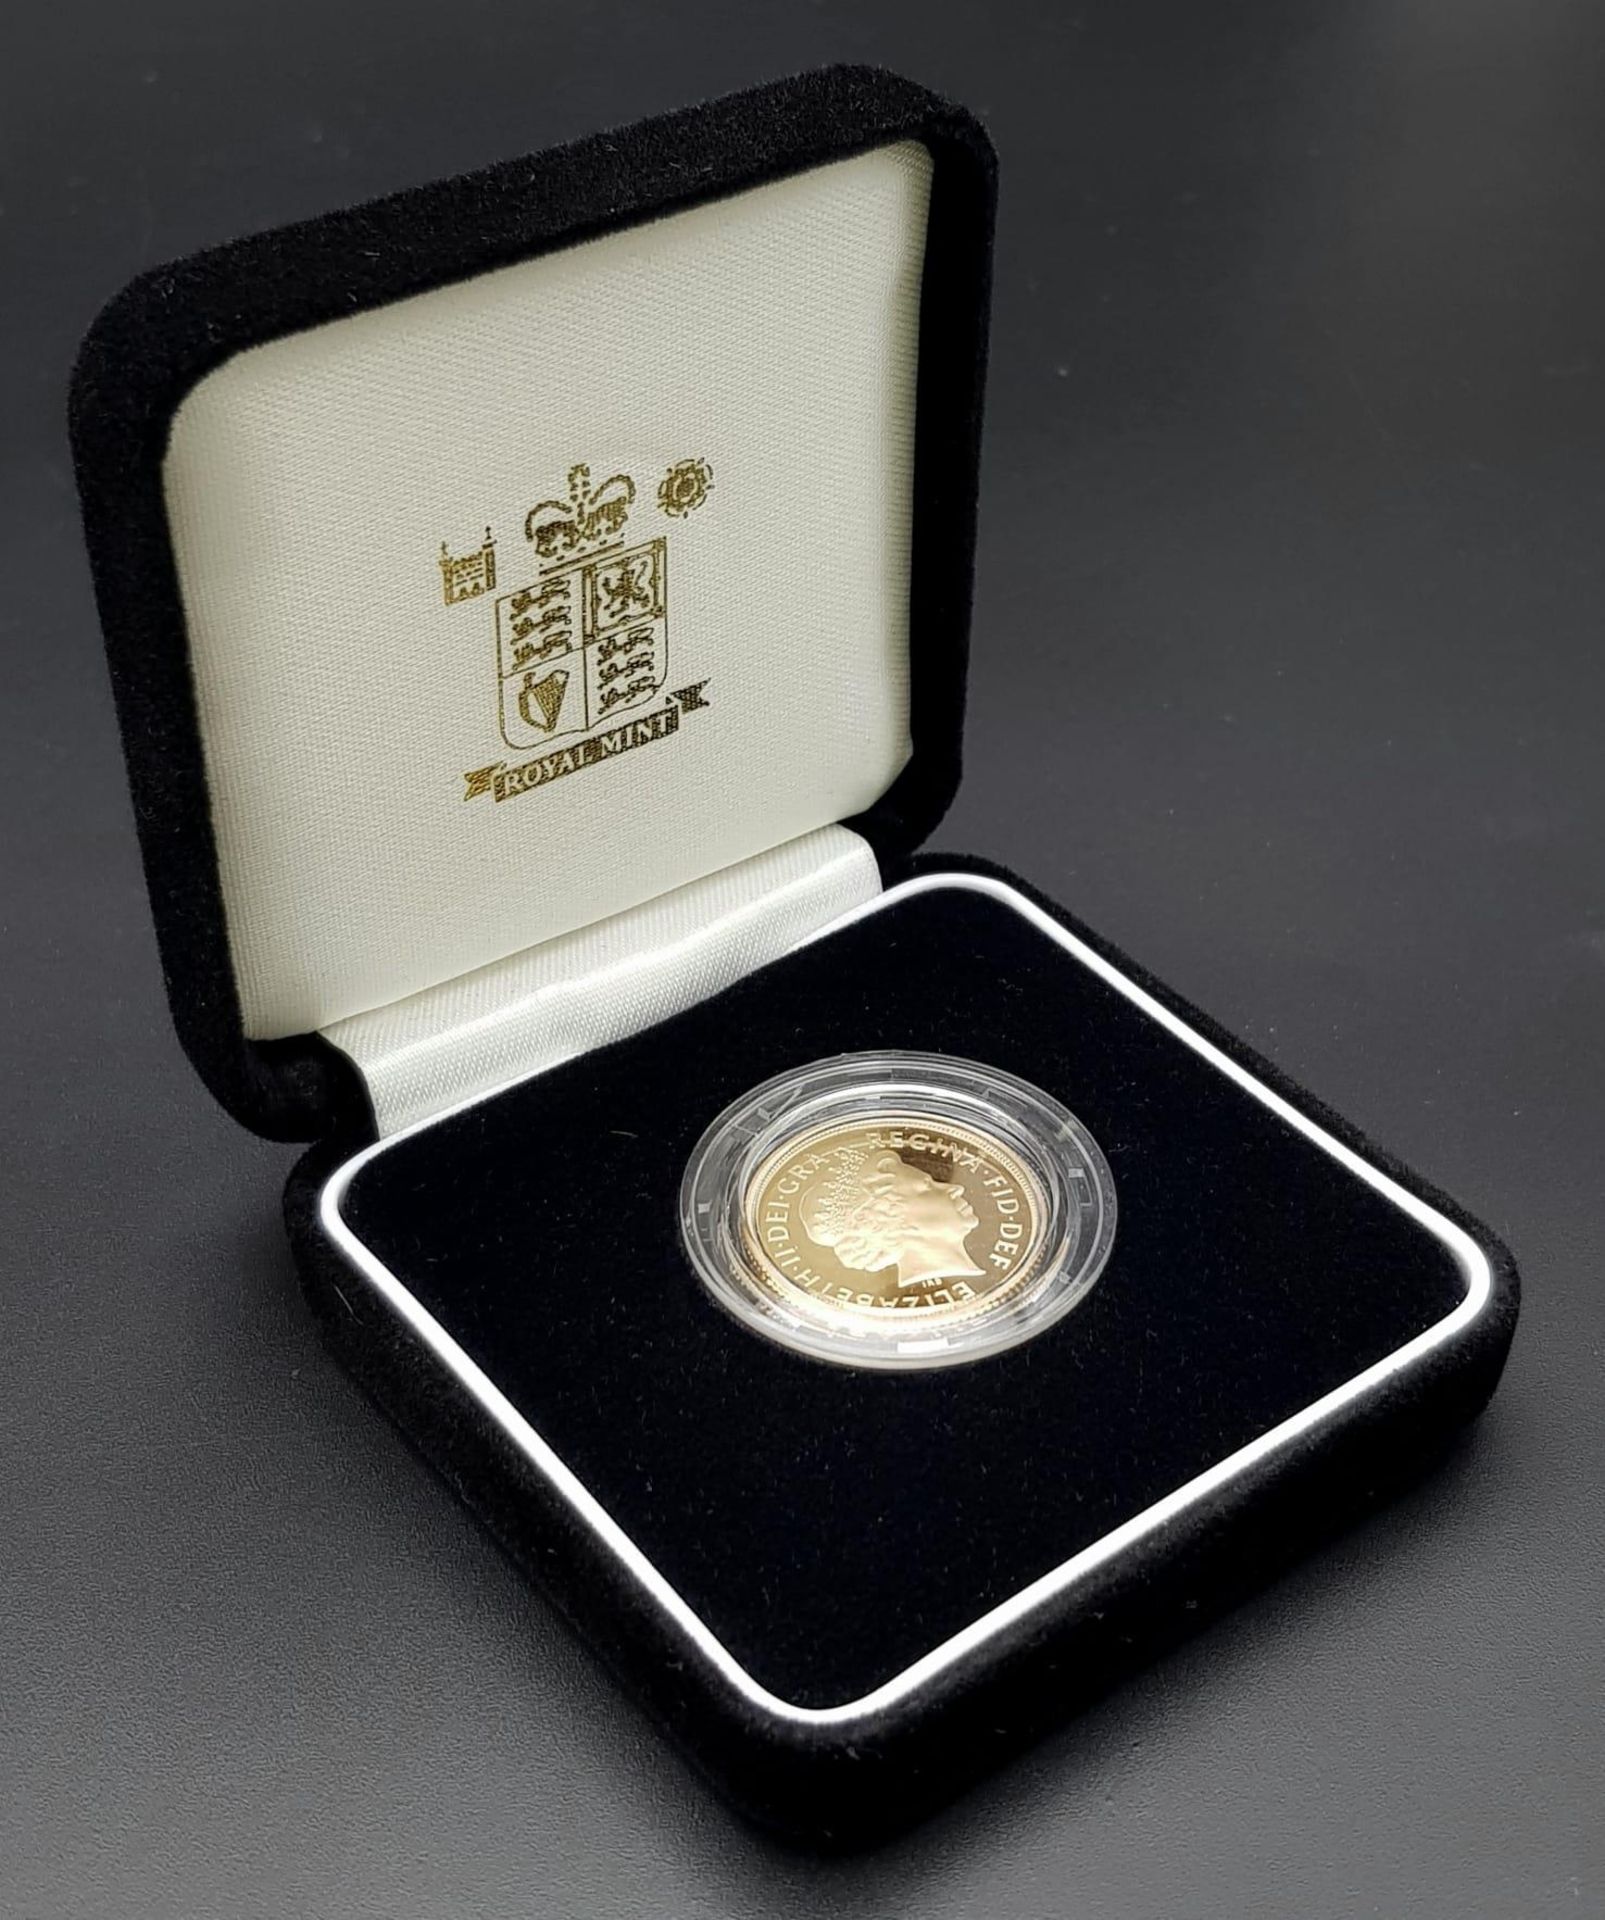 A Royal Mint Queen Elizabeth II 2003 Proof 22K Gold Full Sovereign. Classic George and Dragon - Image 3 of 6